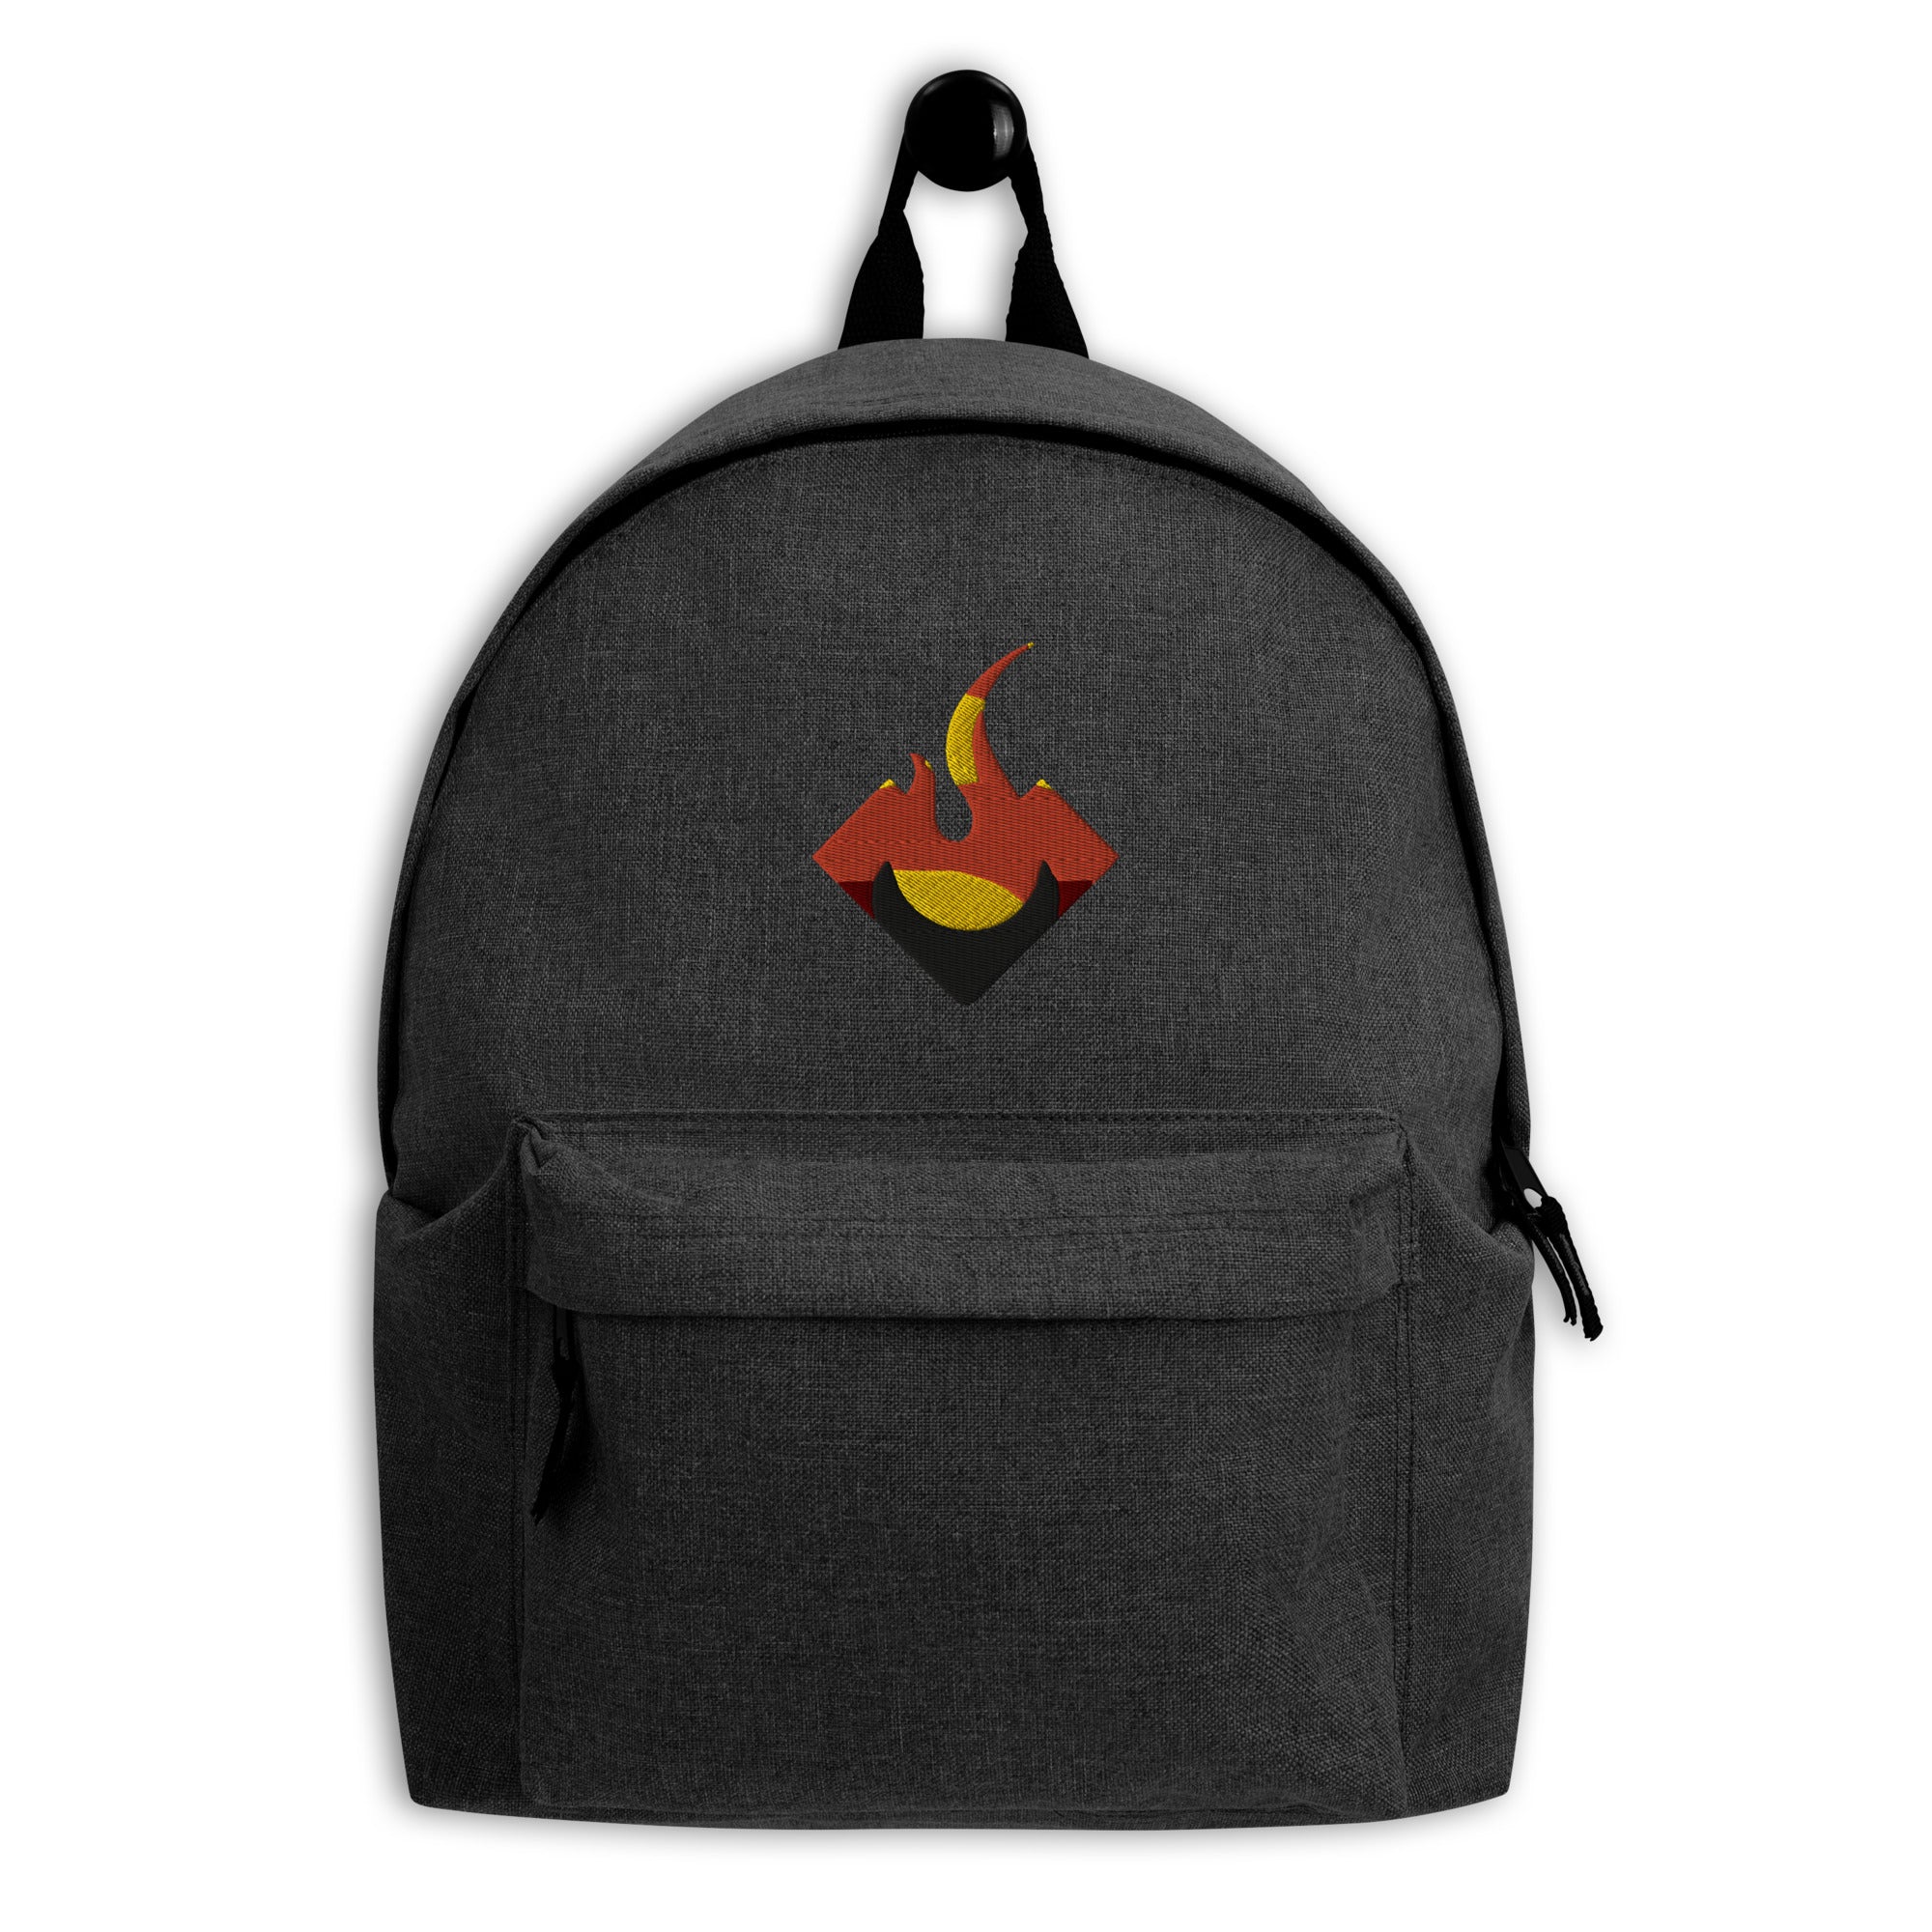 VALIANT Embroidered Backpack